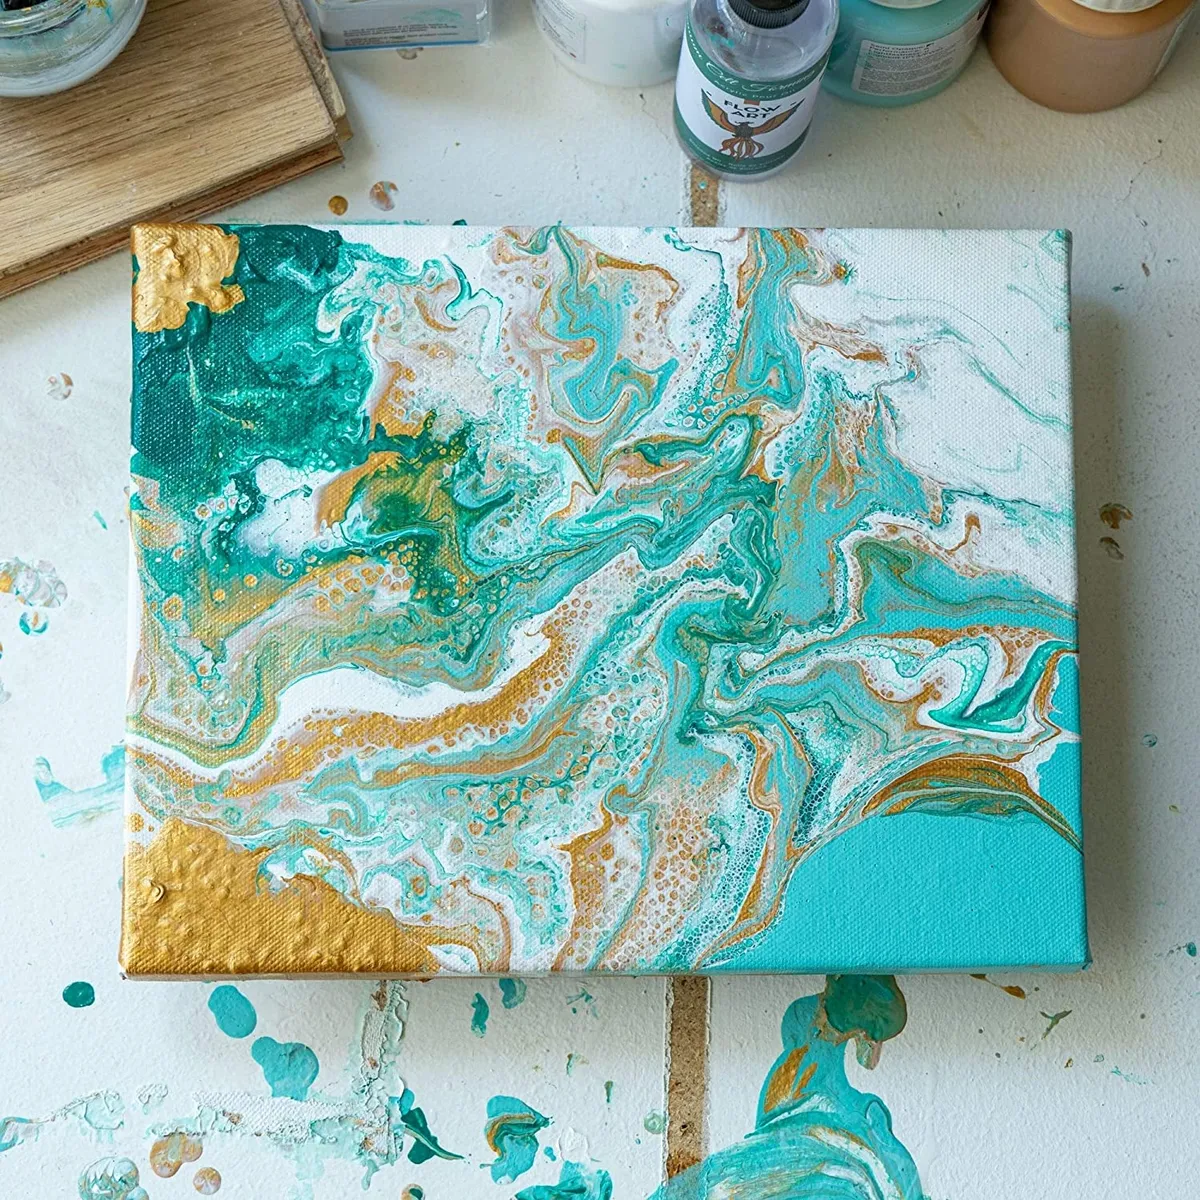 10 Acrylic Paint Pouring Ideas - With Steps!, Art to Art